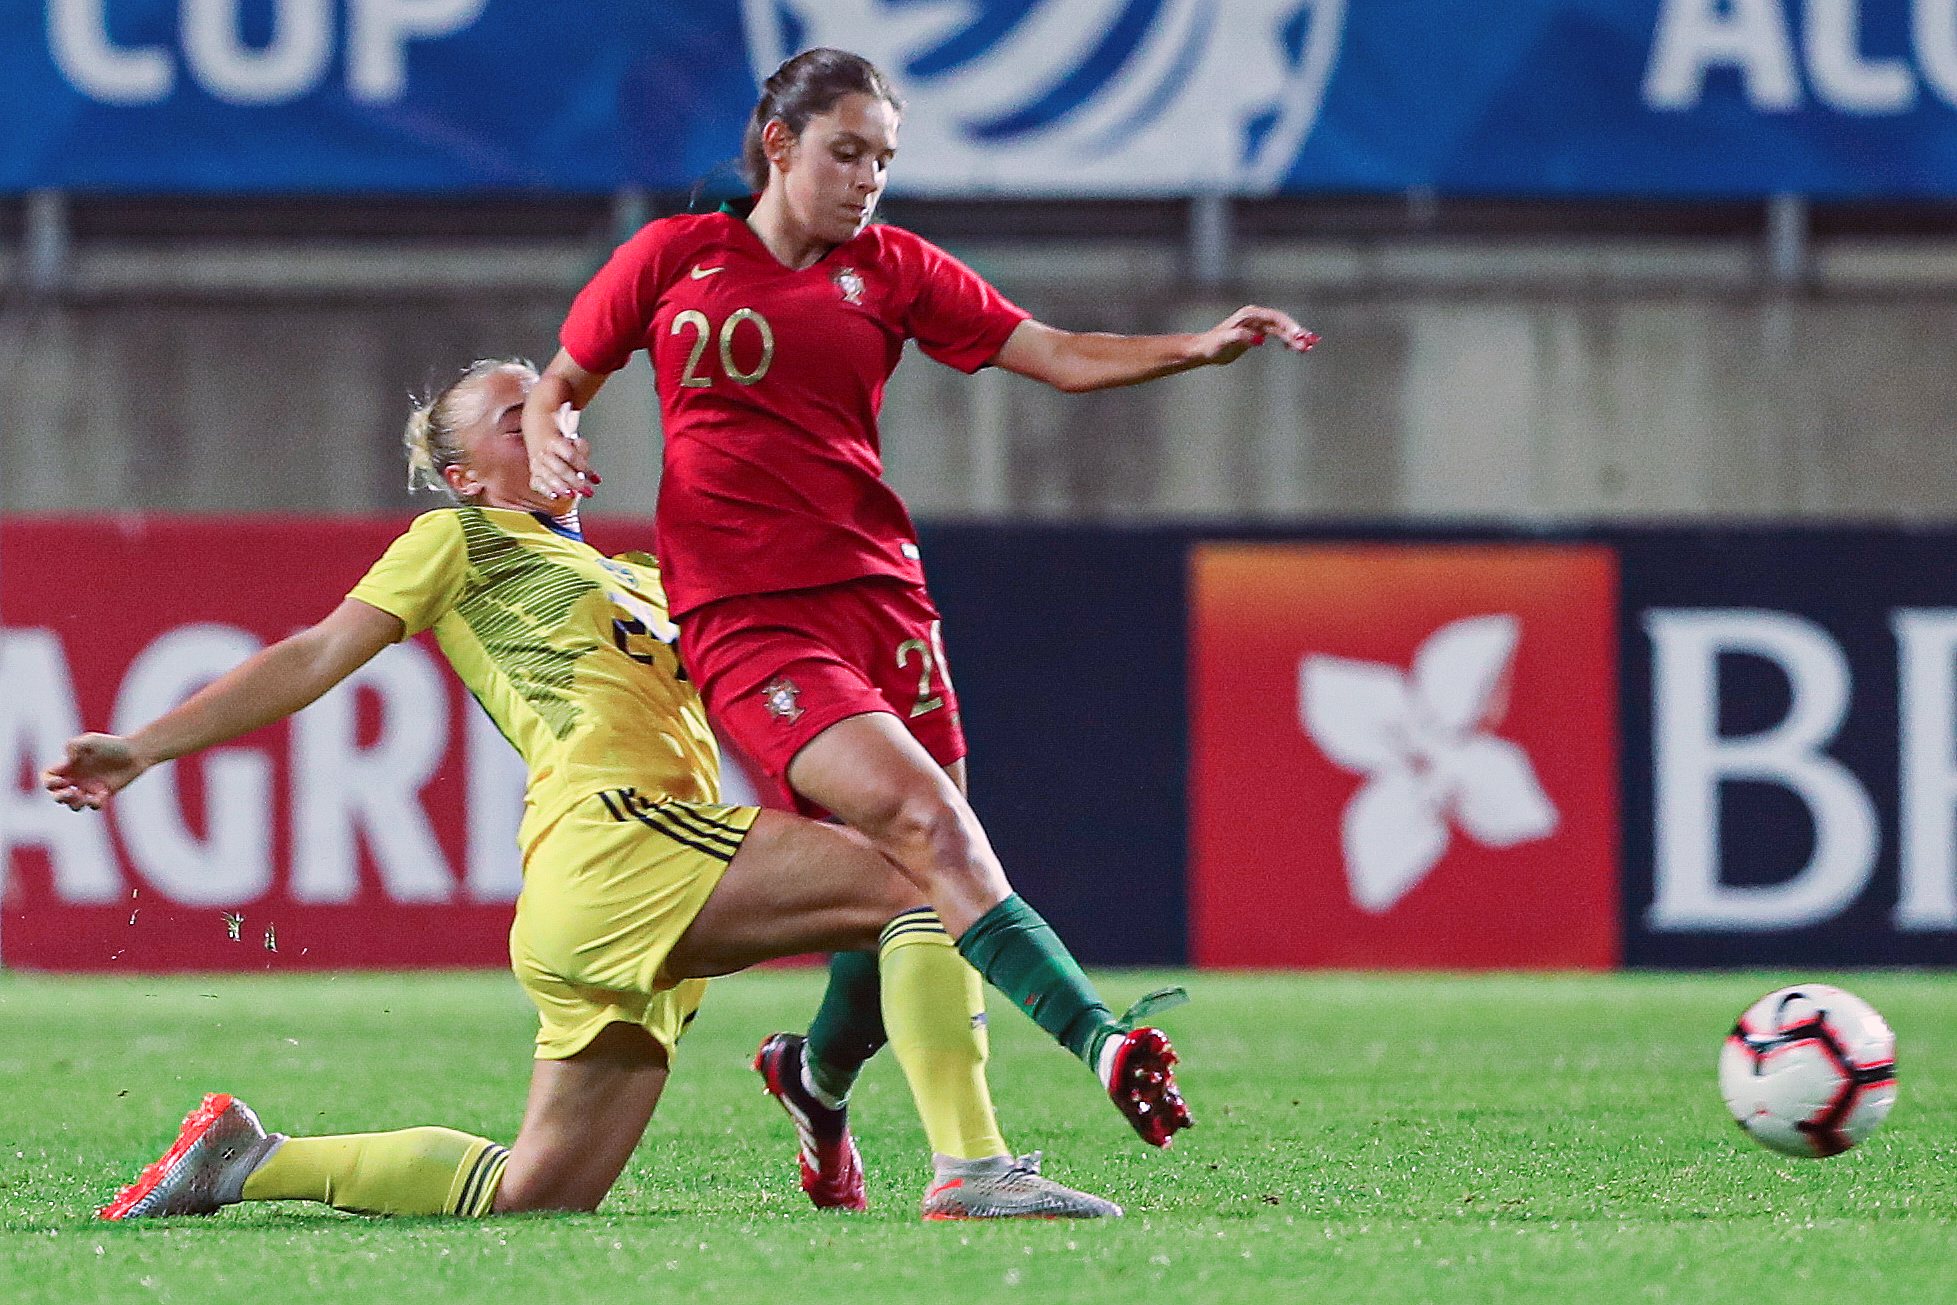 Portugal soccer player, Andreia Faria (R), fights for the ball with Hanna Bennison of Sweden during their Algarve Cup women soccer match held at Algarve Stadium, Faro, Algarve, Portugal, 10th March 2020. LUIS FORRA/LUSA